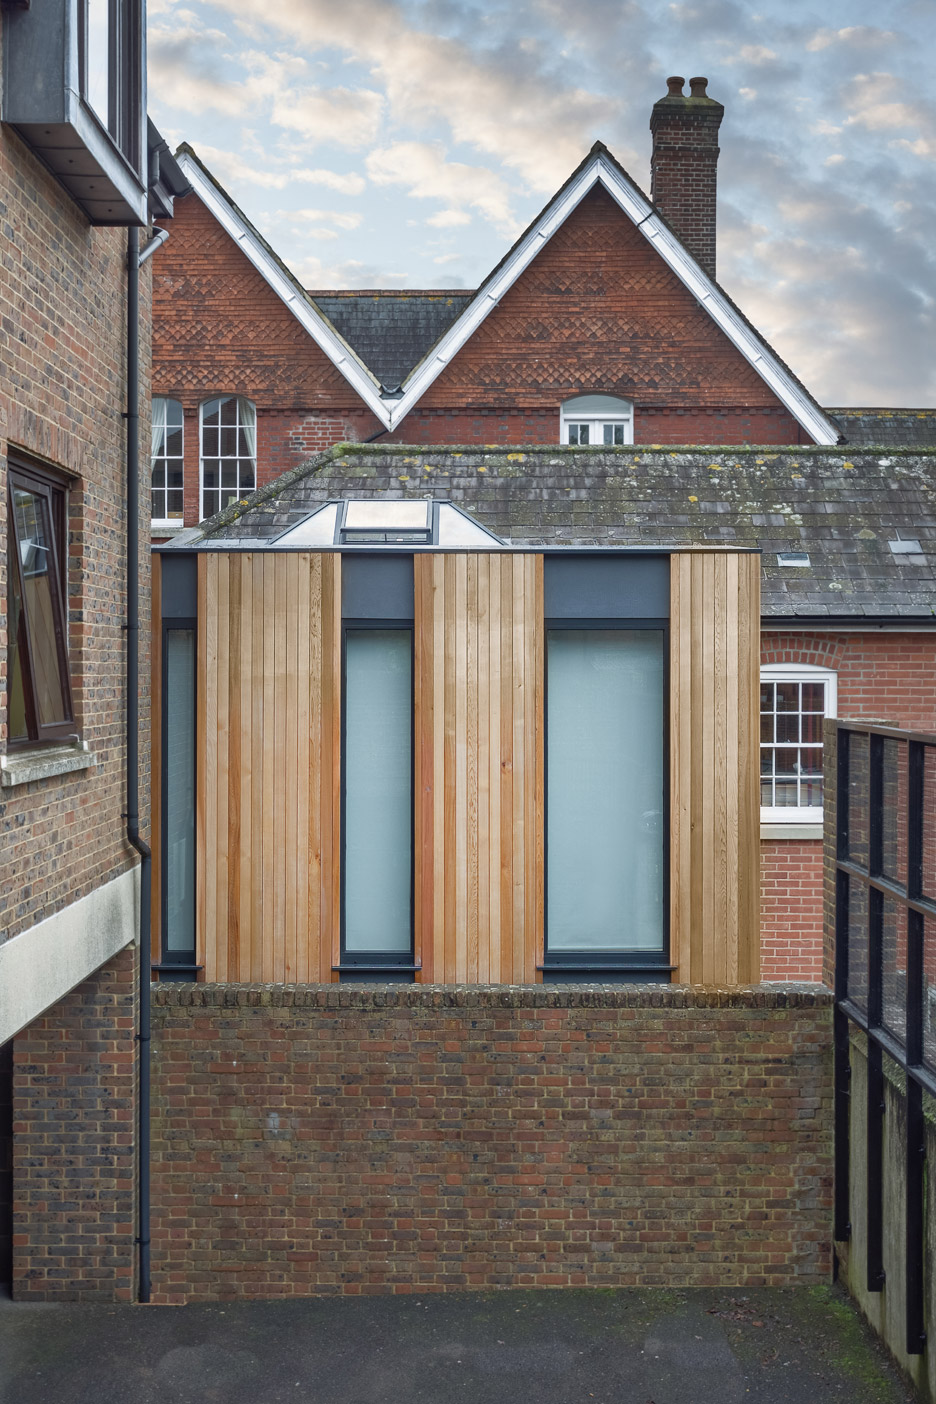 Austen house extension by Adam Knibb Architects